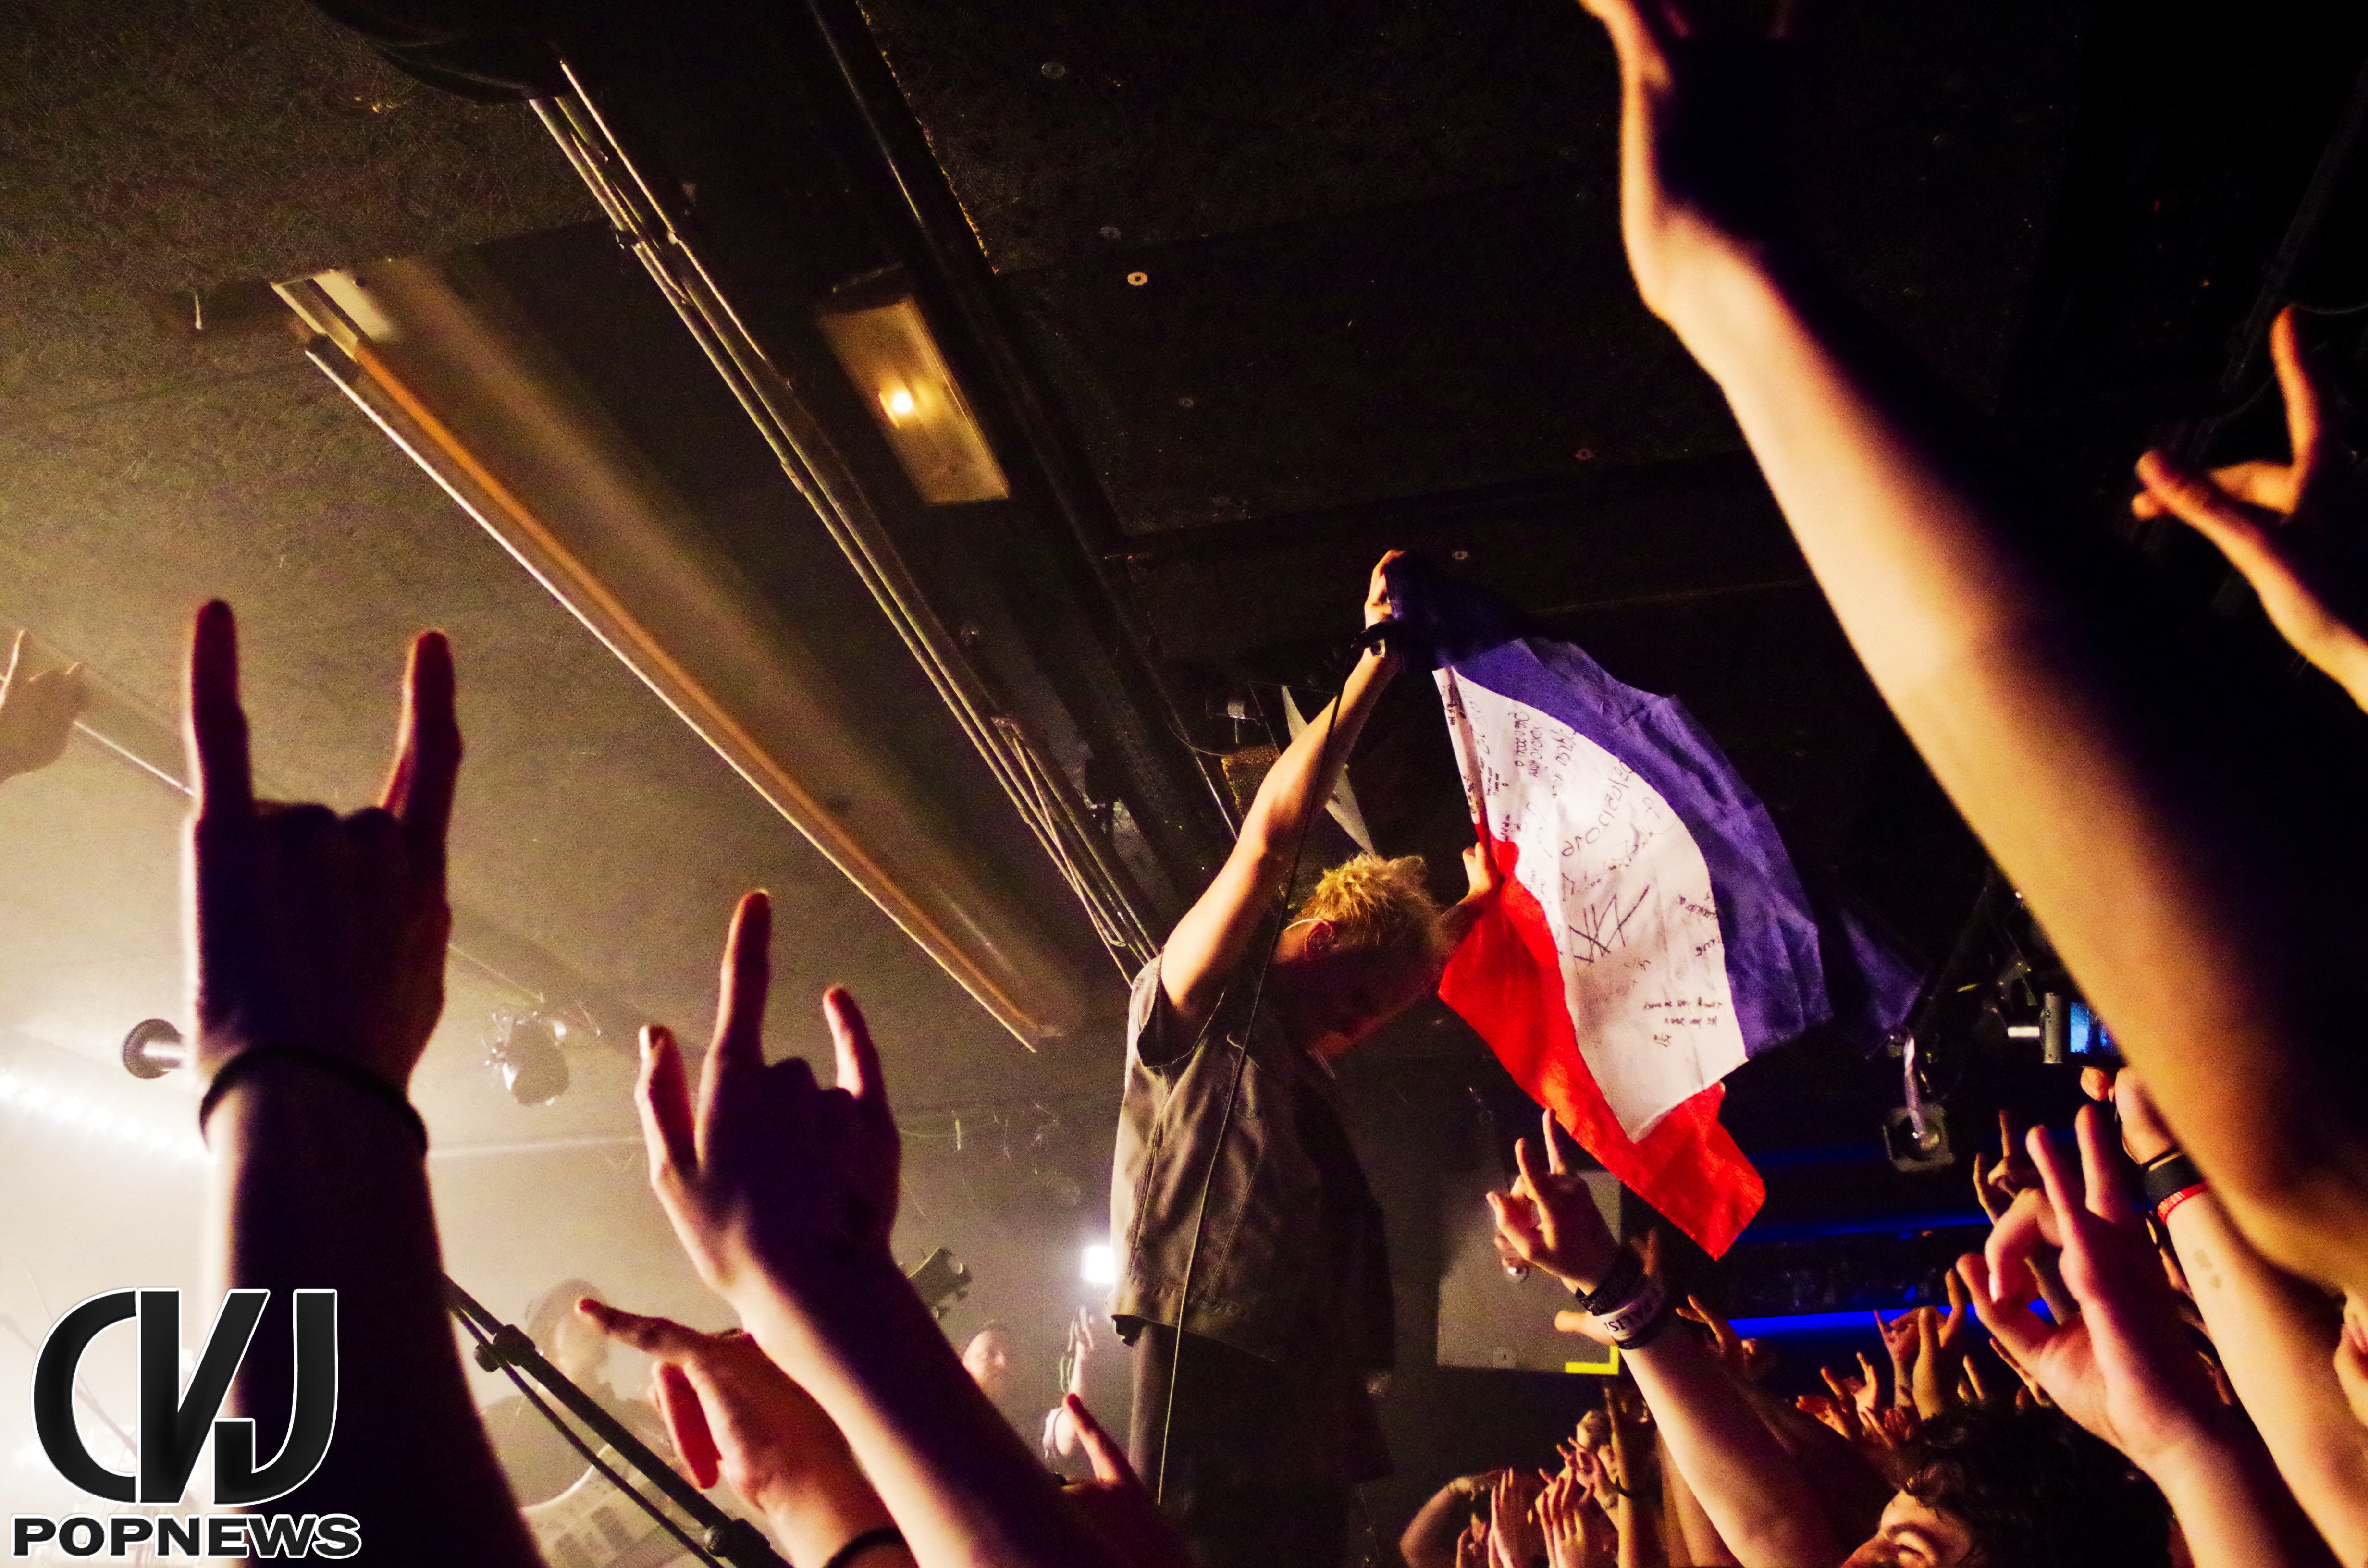 concert_3_coldrain_metal_backstage-by-the-mill_paris_vena_european-tour_headline_wage-war_counting-days_53